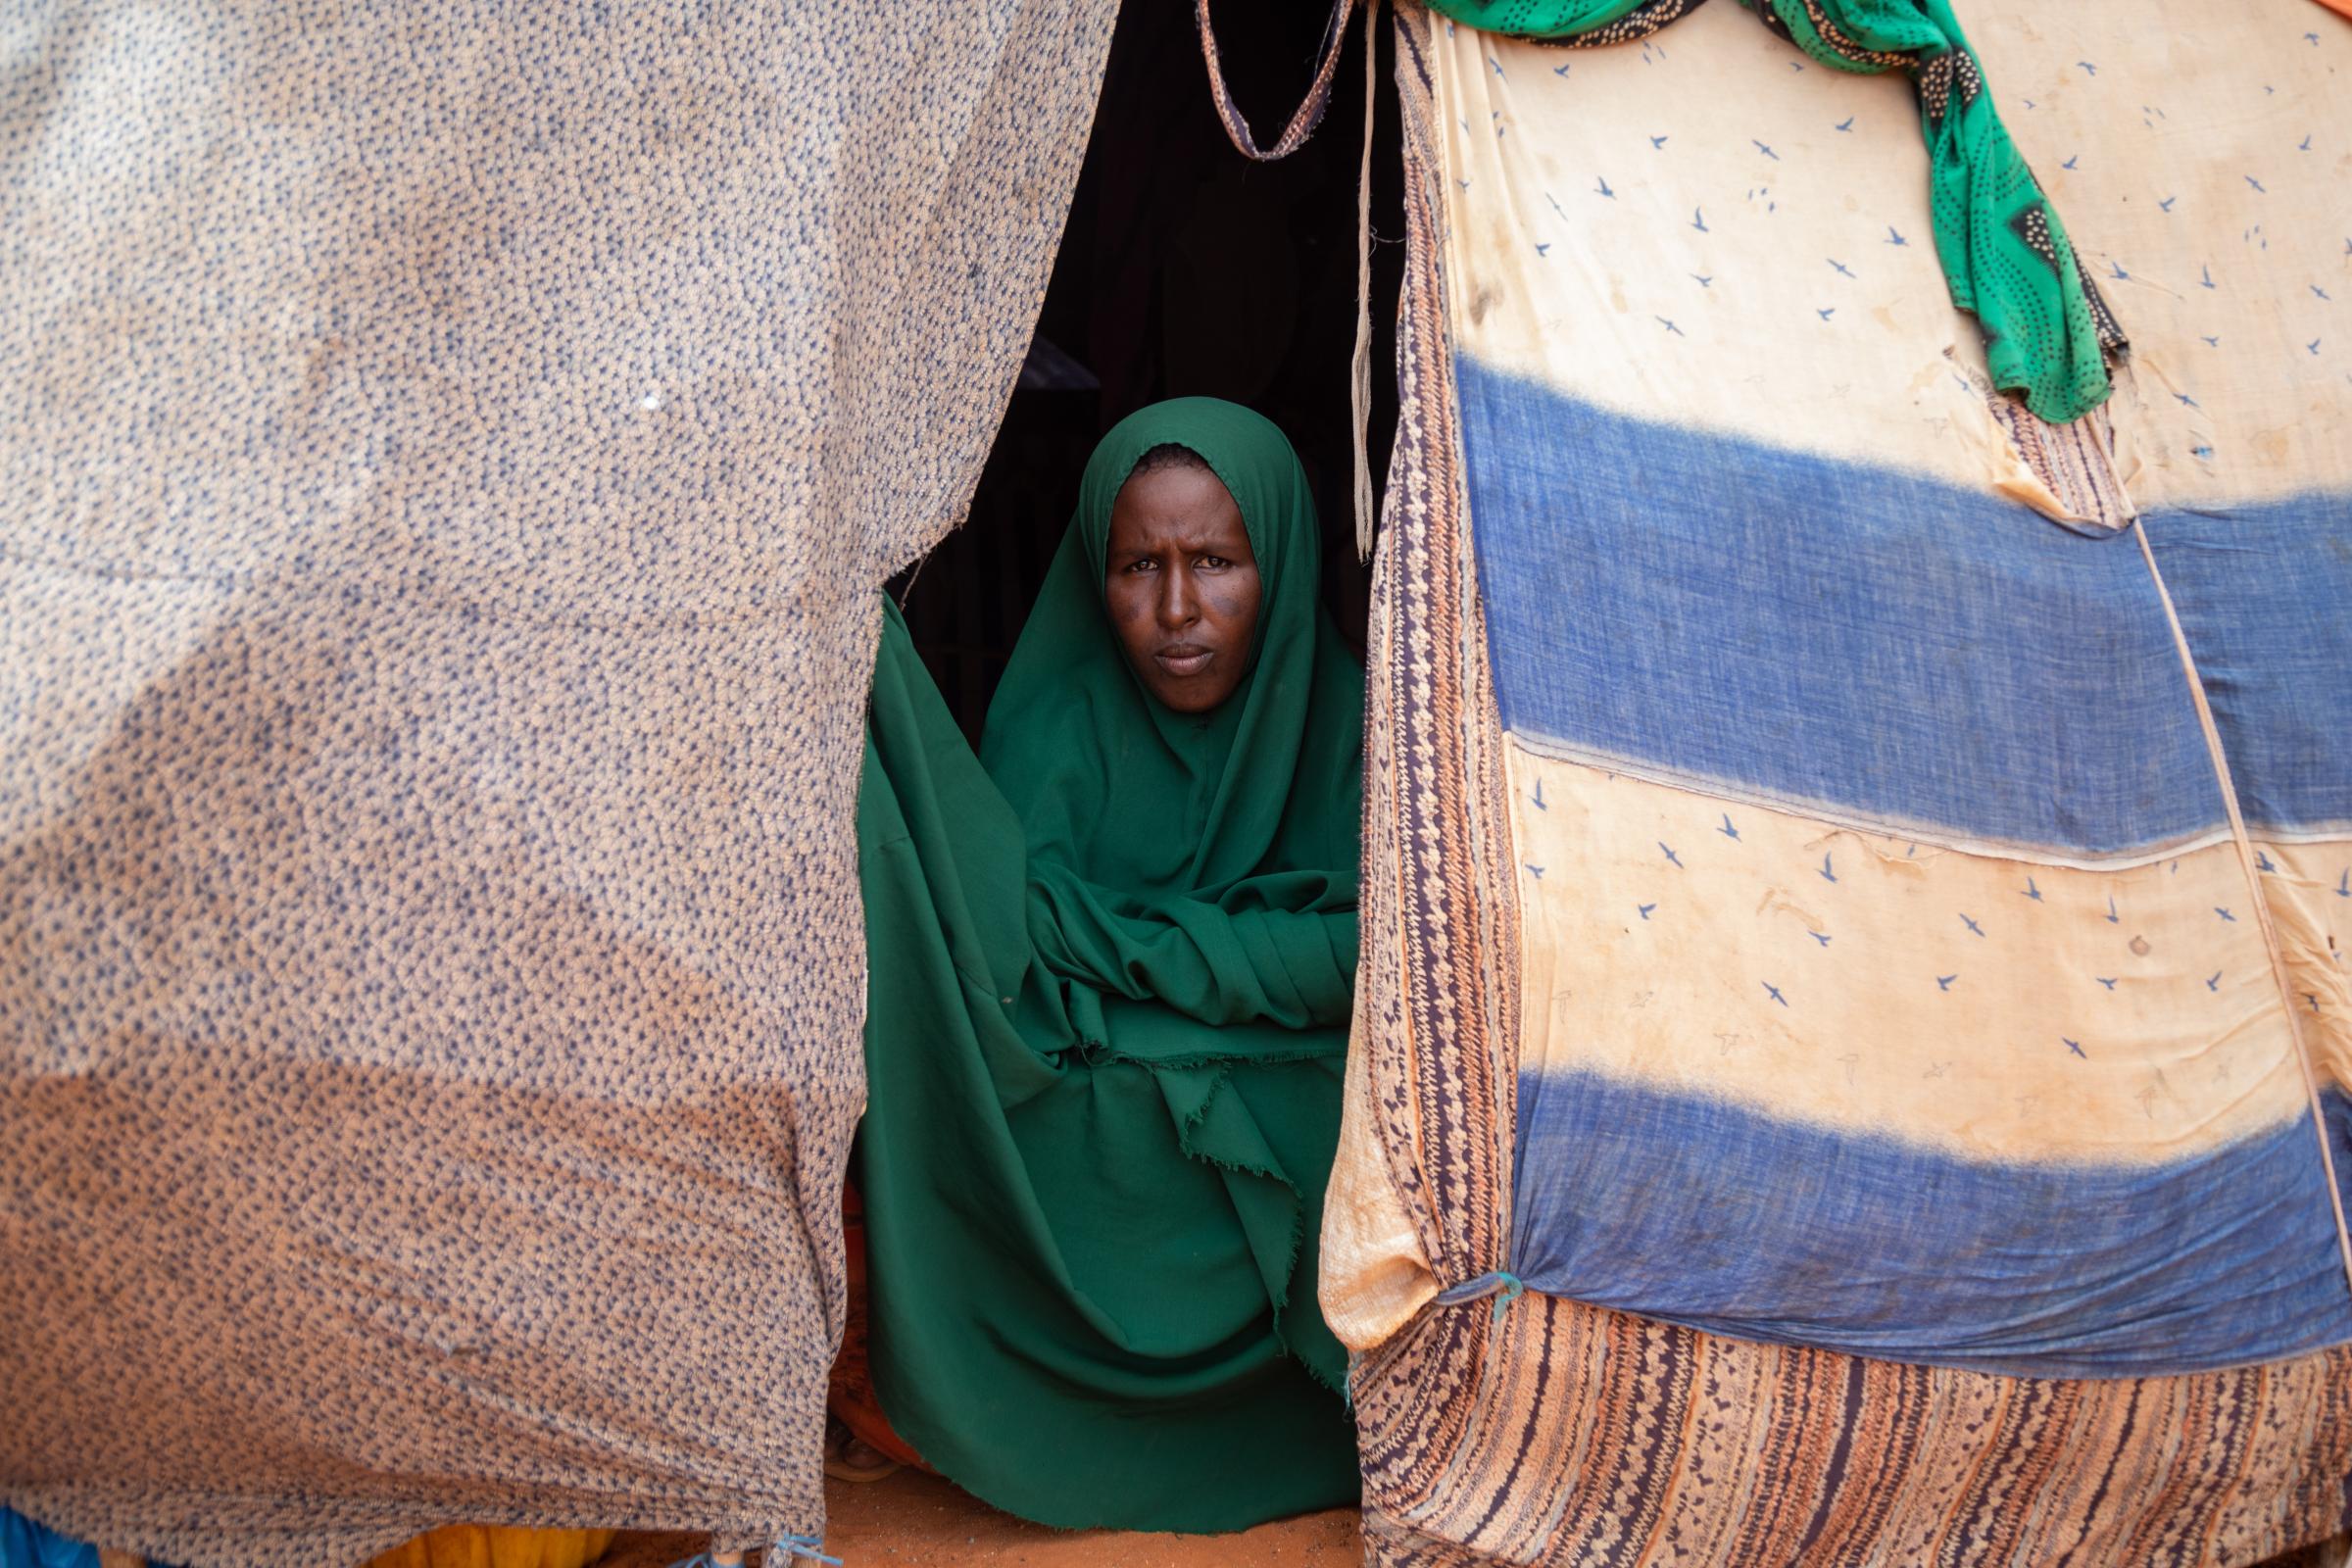 Overcoming Challenges through Healthcare Outreach in Kismayo - Edla Abdulahi, a displaced Somali woman, courageously faces the challenges of pregnancy amidst...